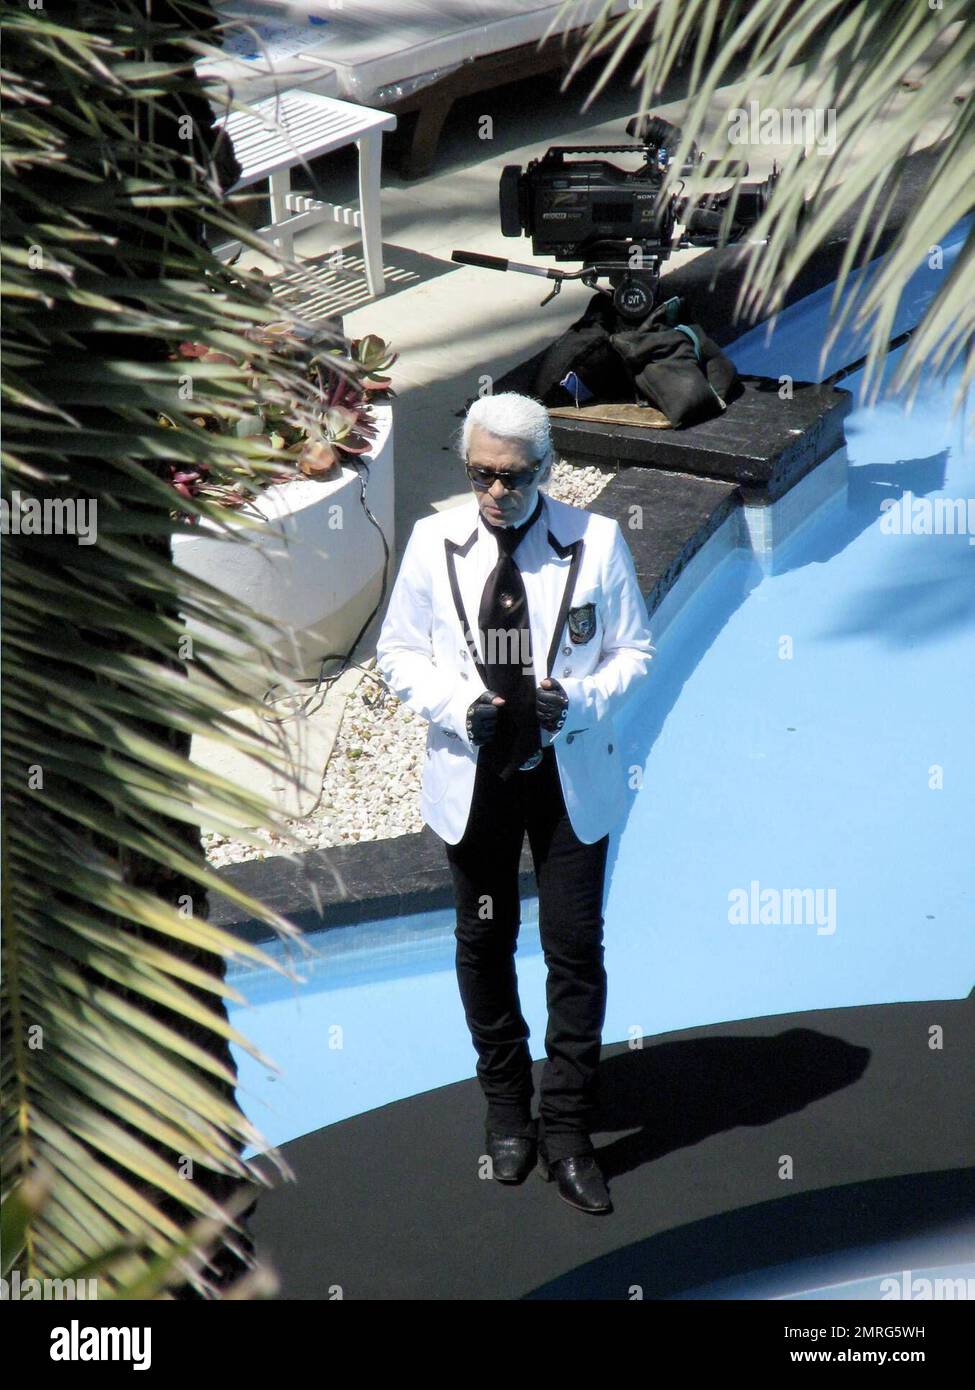 Exclusive!! Karl Lagerfeld oversees setup and rehearsal for the